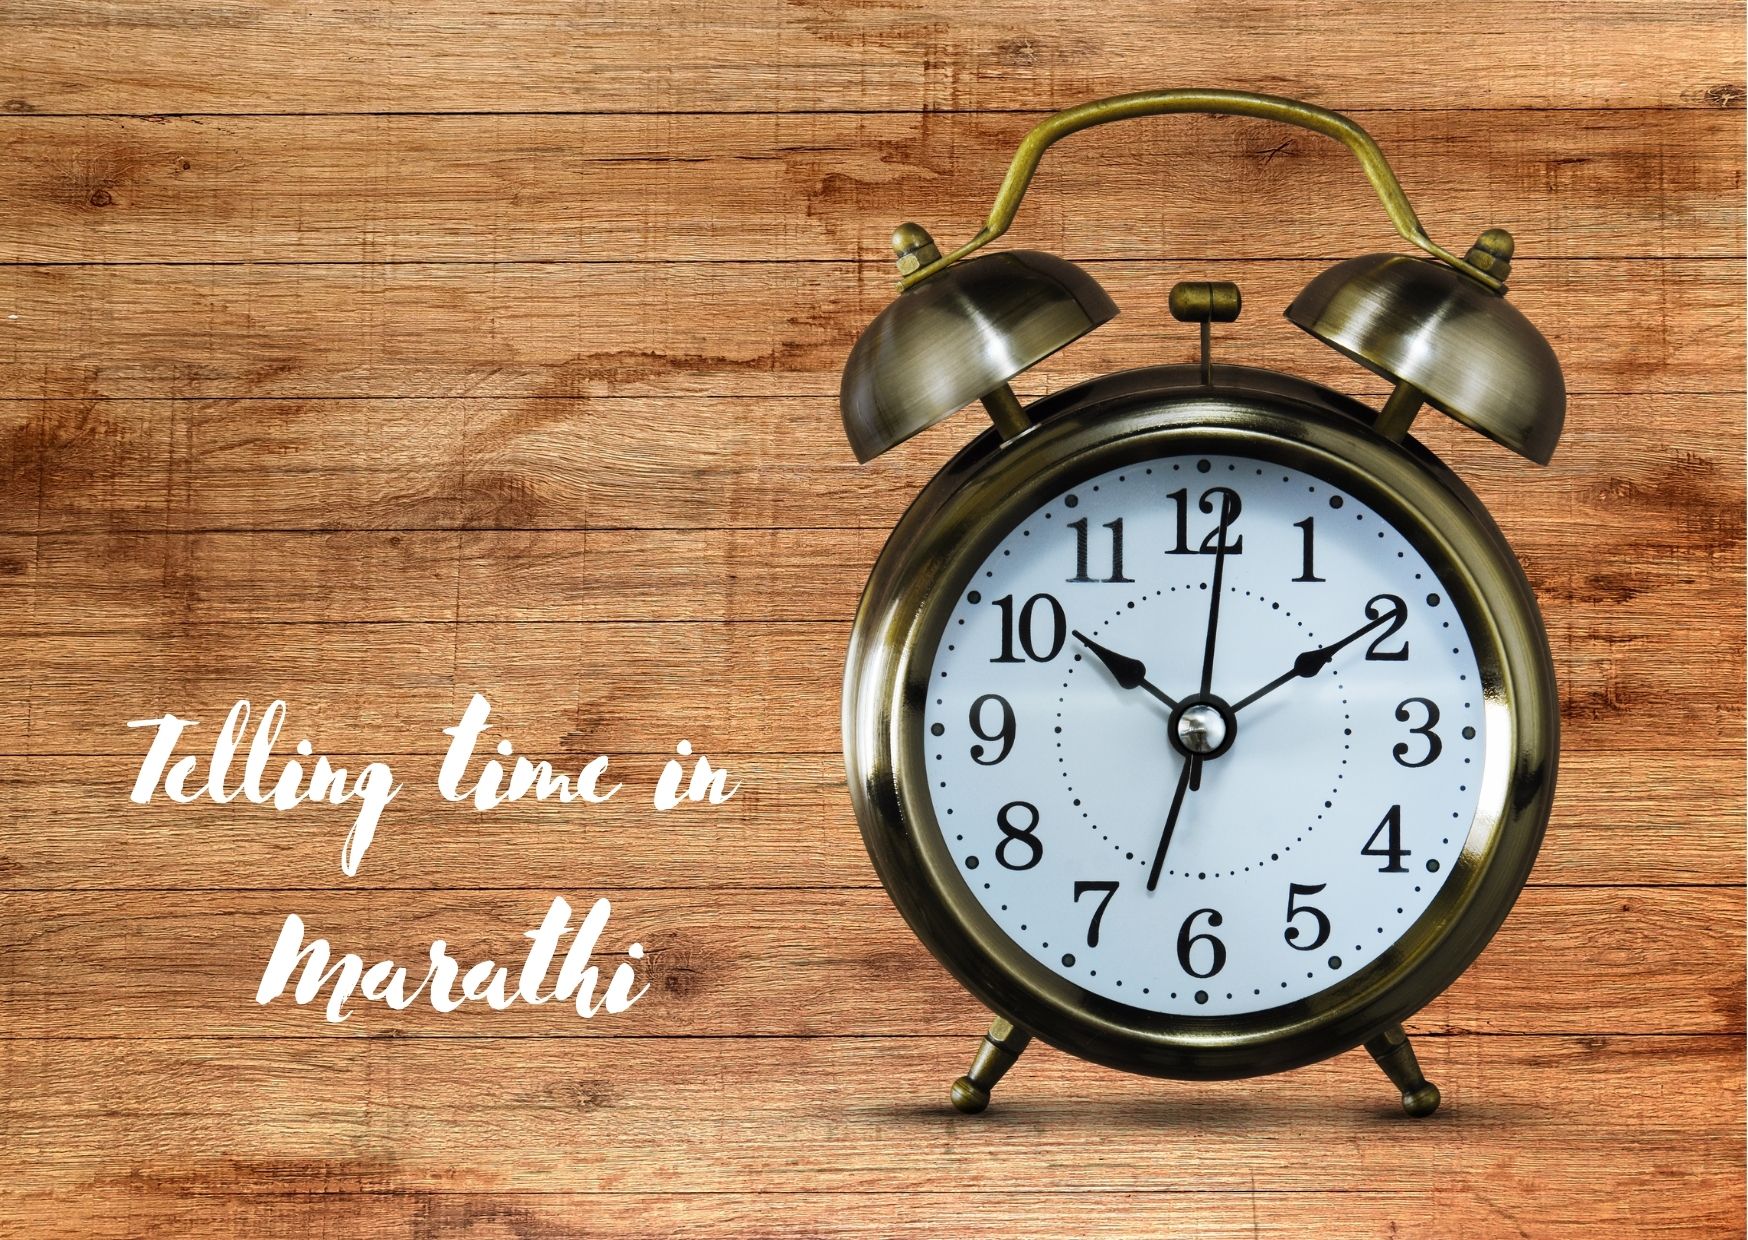 Learn to tell time in Marathi